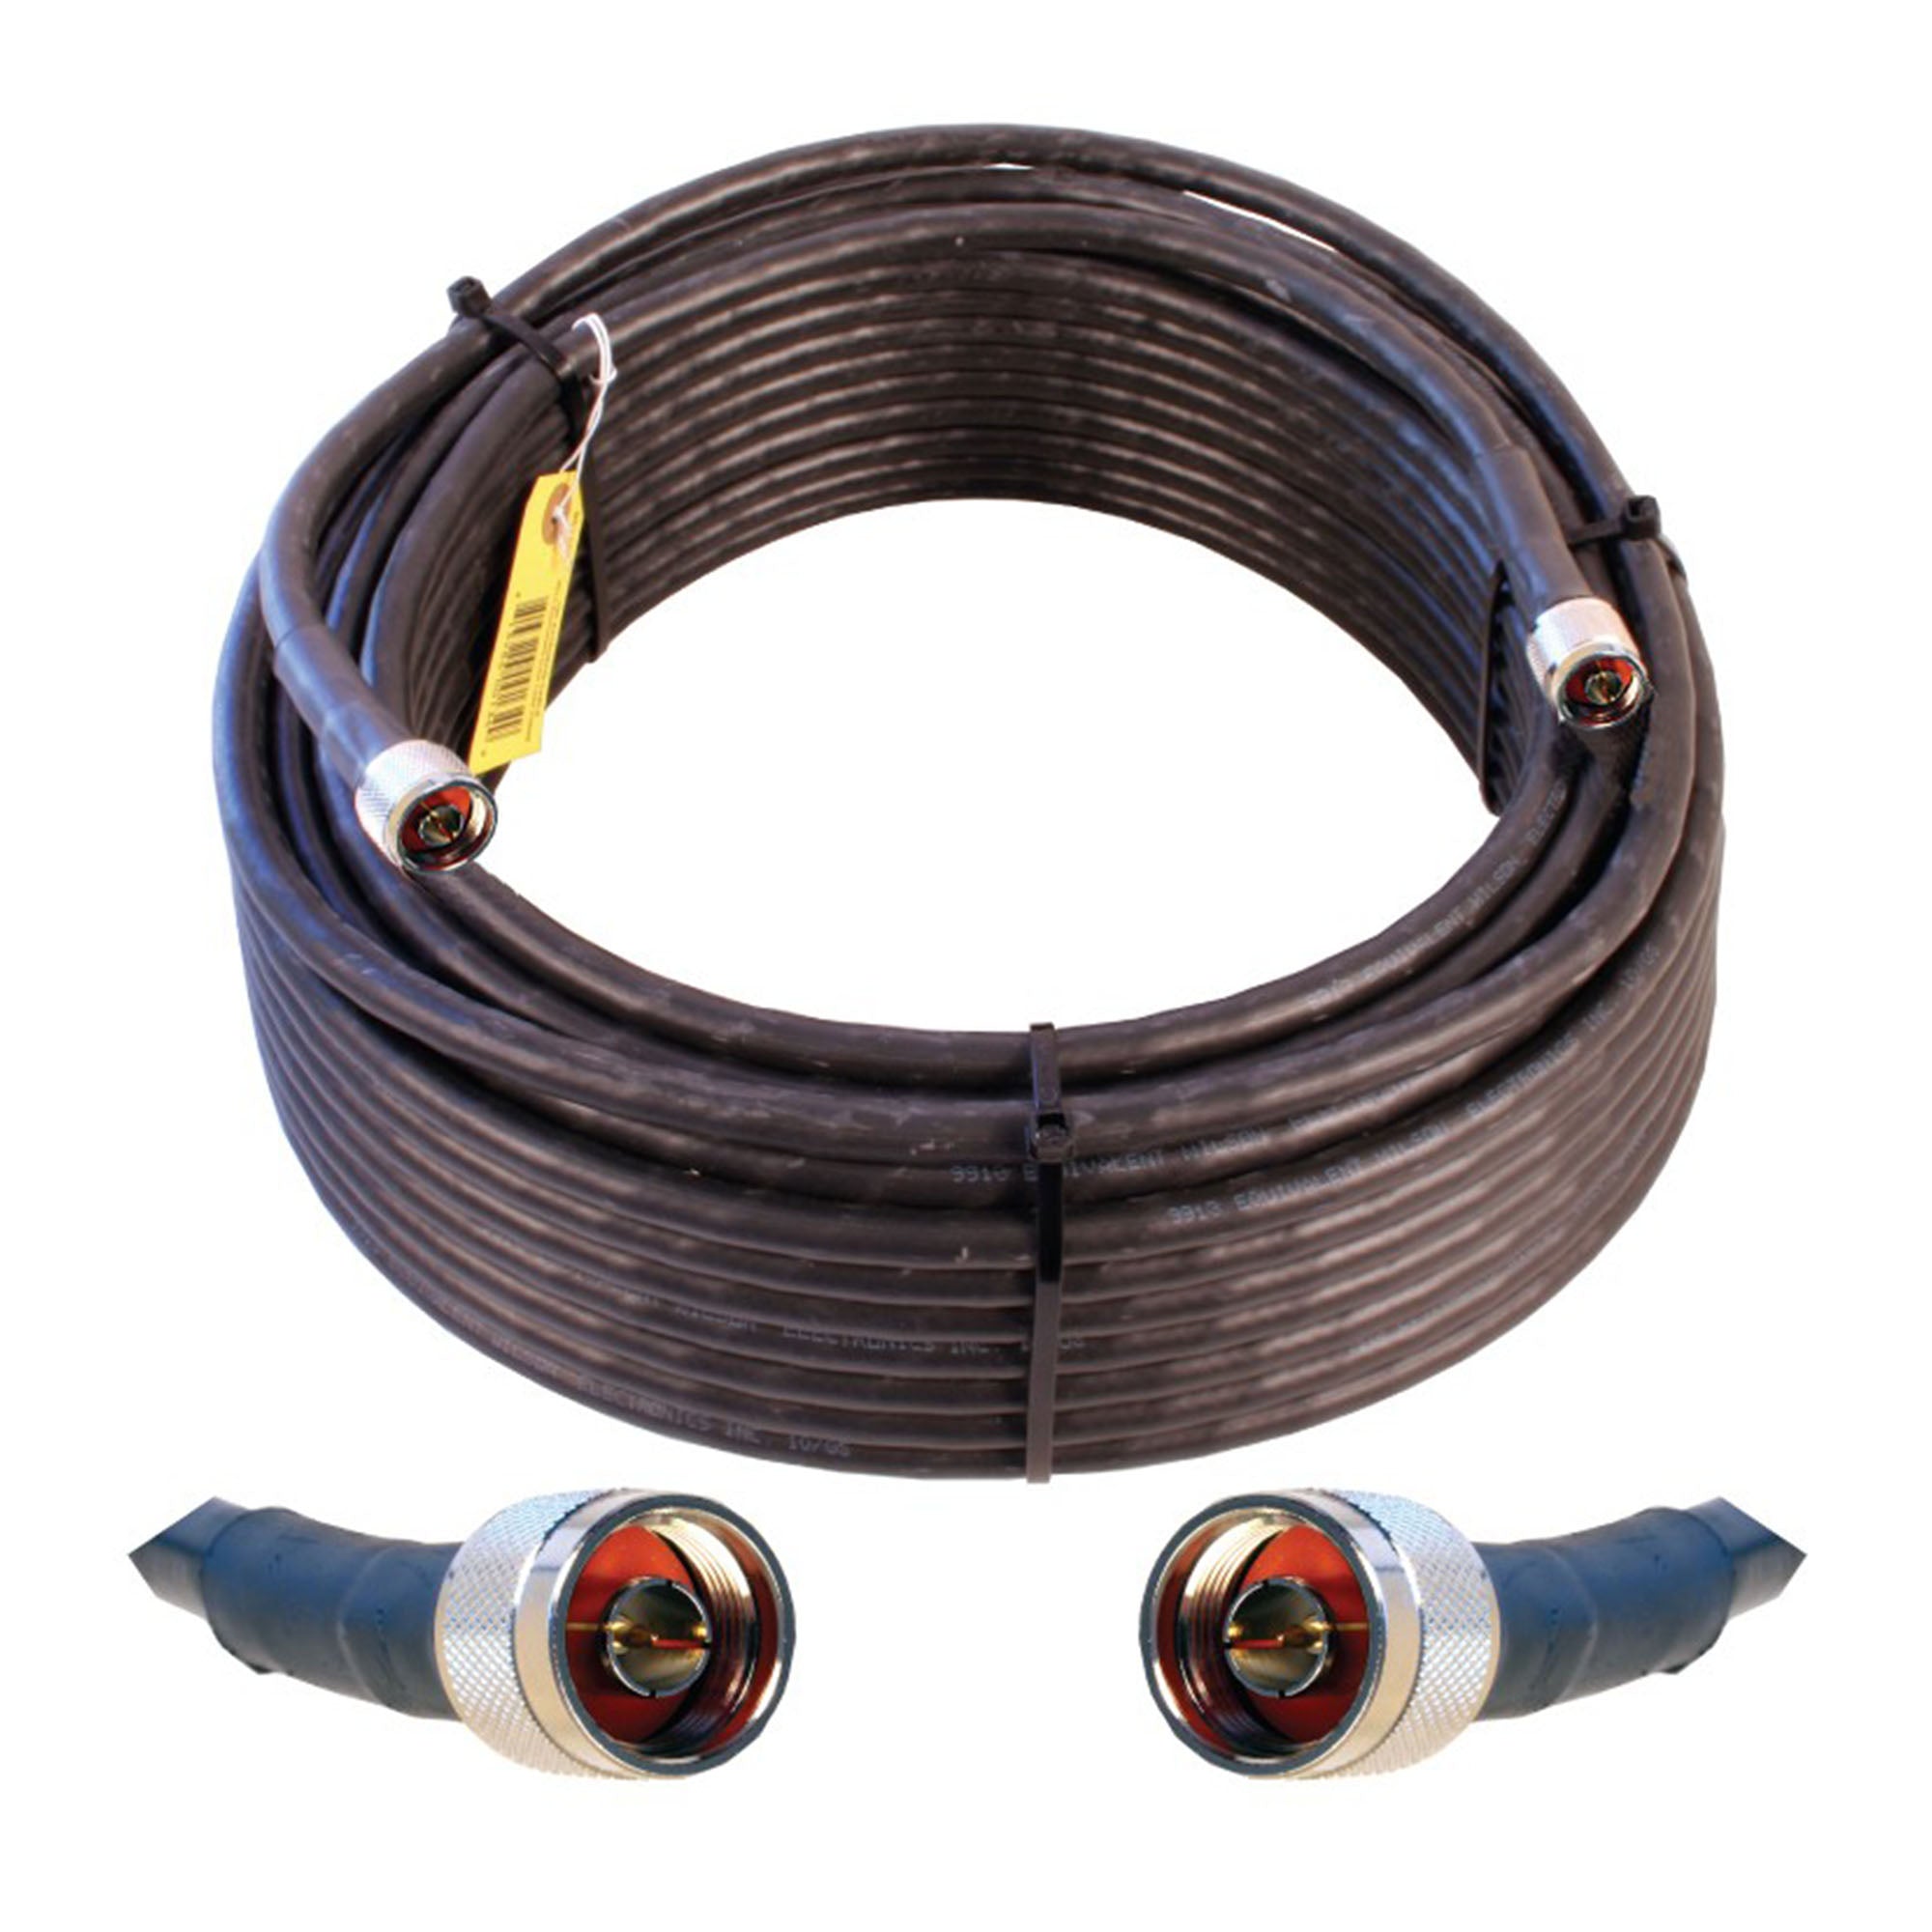 Cable 100 ft. LMR400 eqiv. ultra low loss cable (N male - N male ends) - 670WI952300